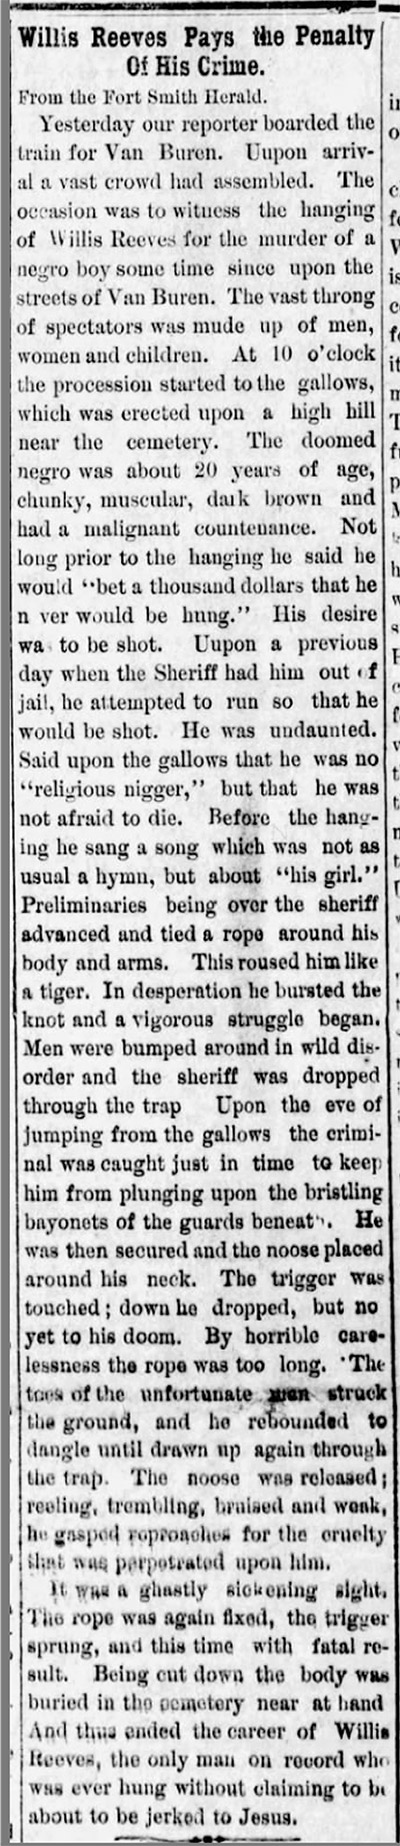 "Willis Reeves pays the penalty for his crime" newspaper clipping